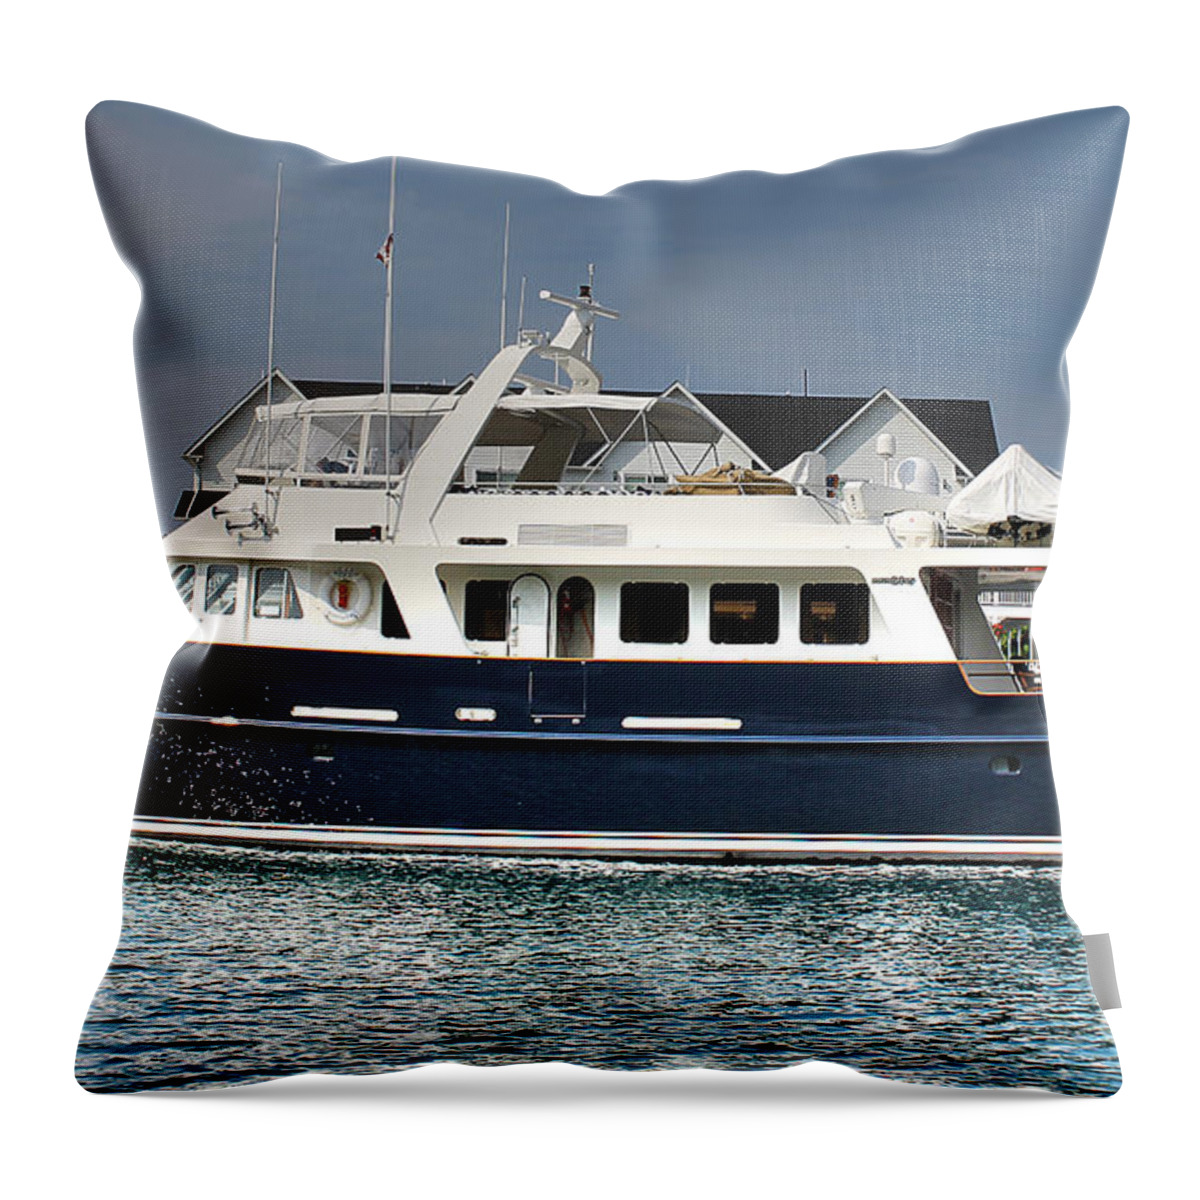 American Throw Pillow featuring the photograph American Leisure Cruise by Nina Silver